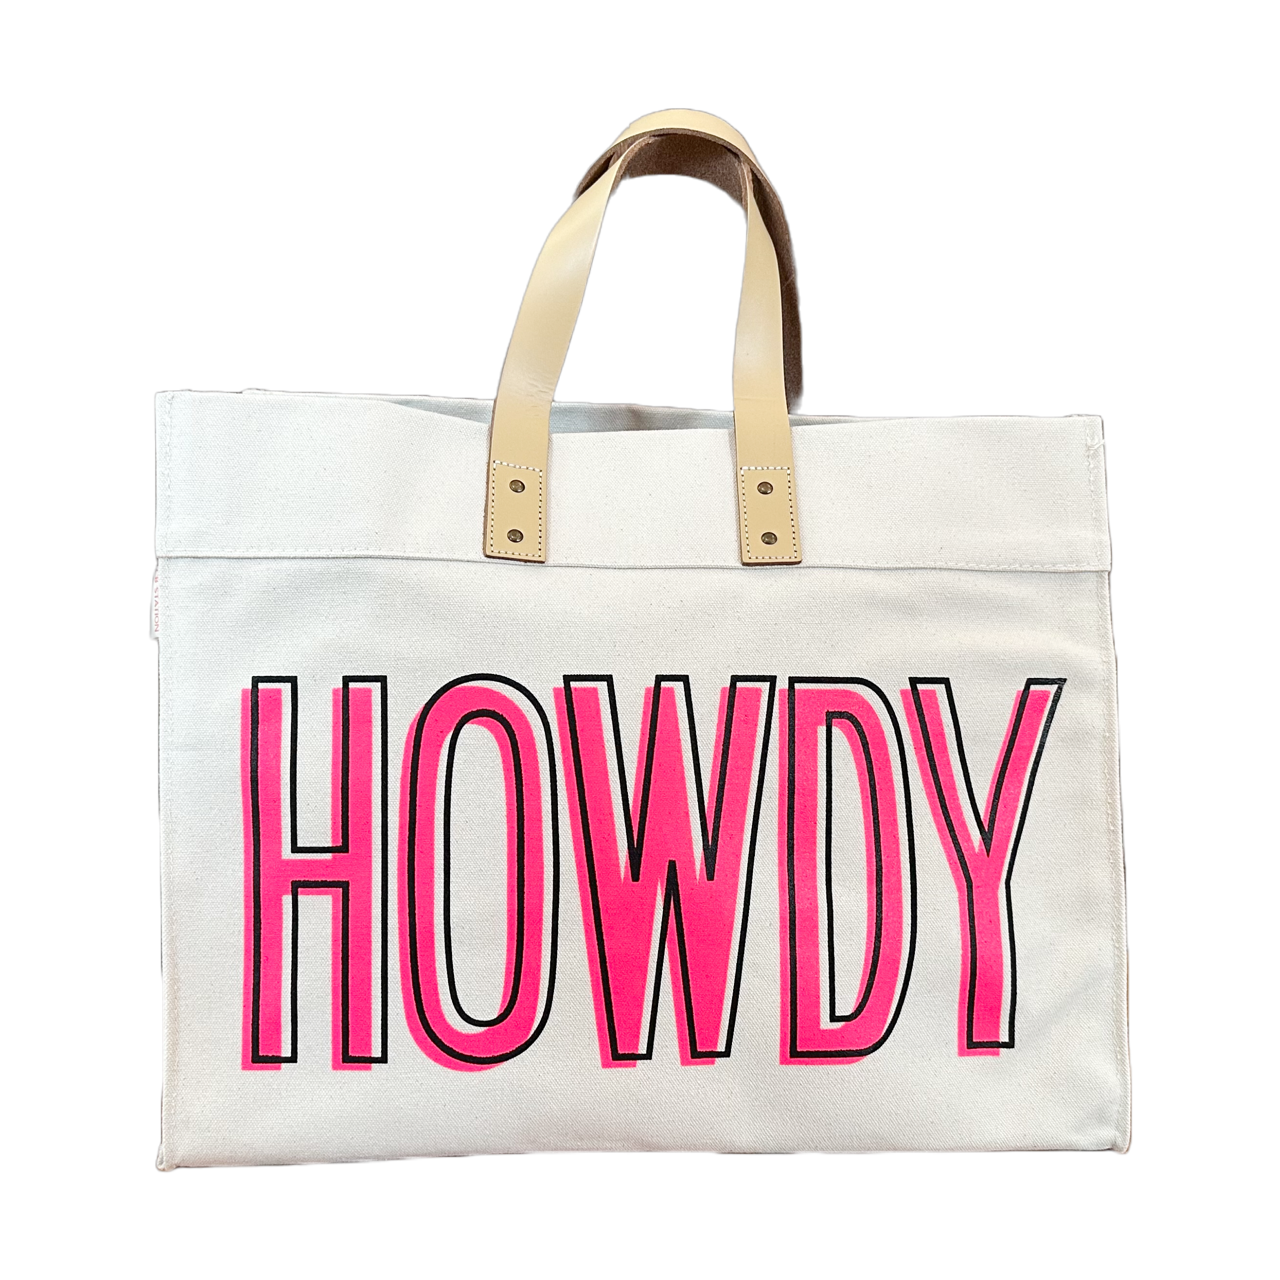 Howdy Tote - Hot Pink